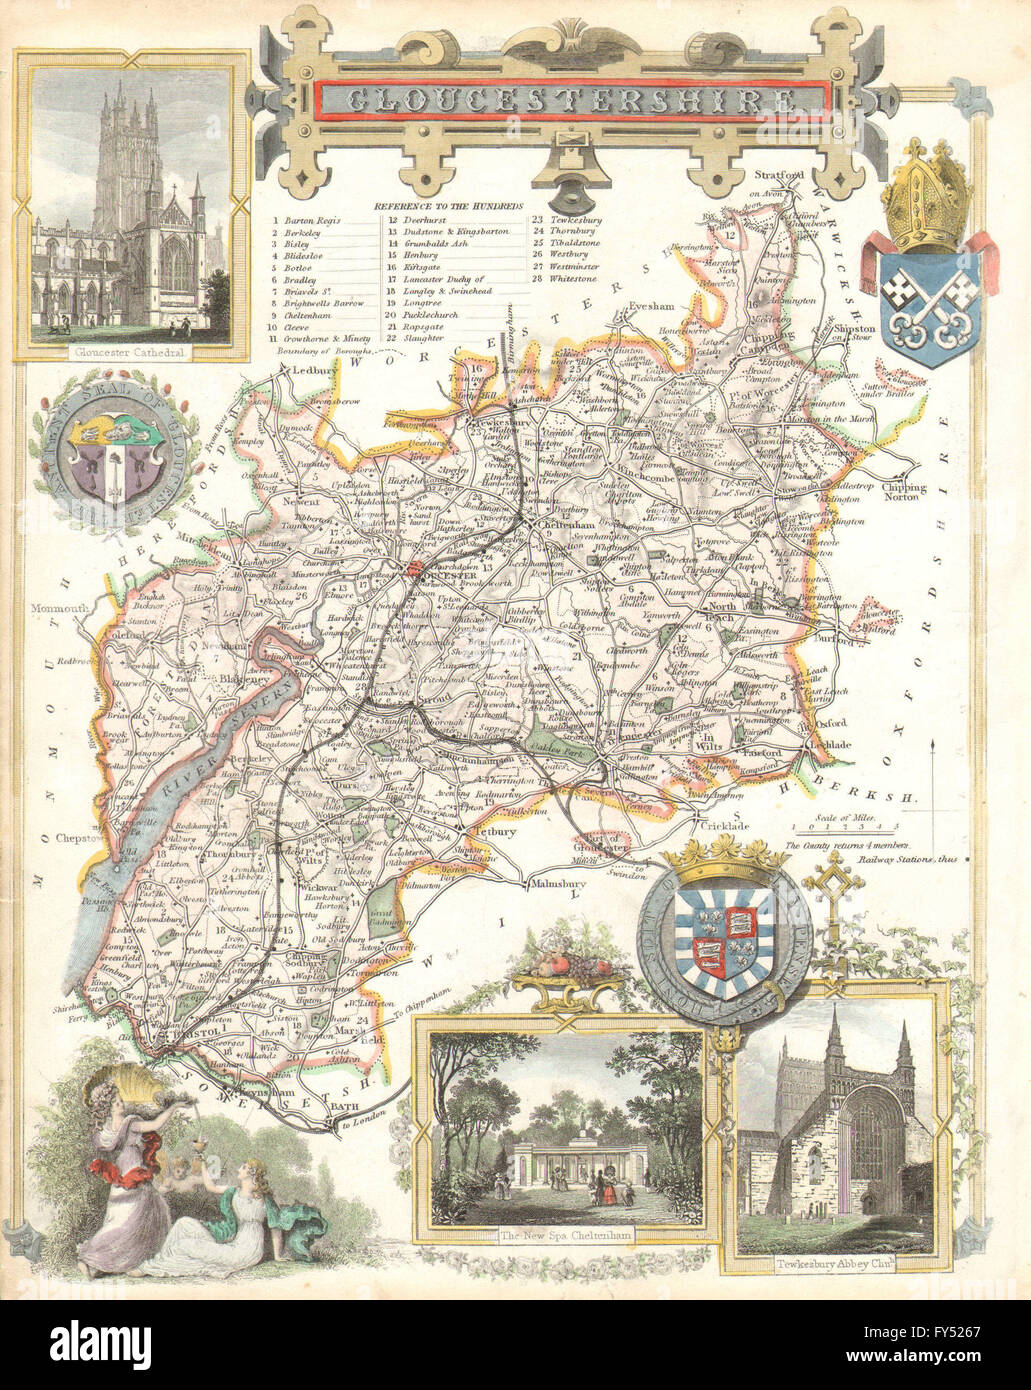 Gloucestershire antique hand-coloured county map by Thomas Moule, c1840 Stock Photo